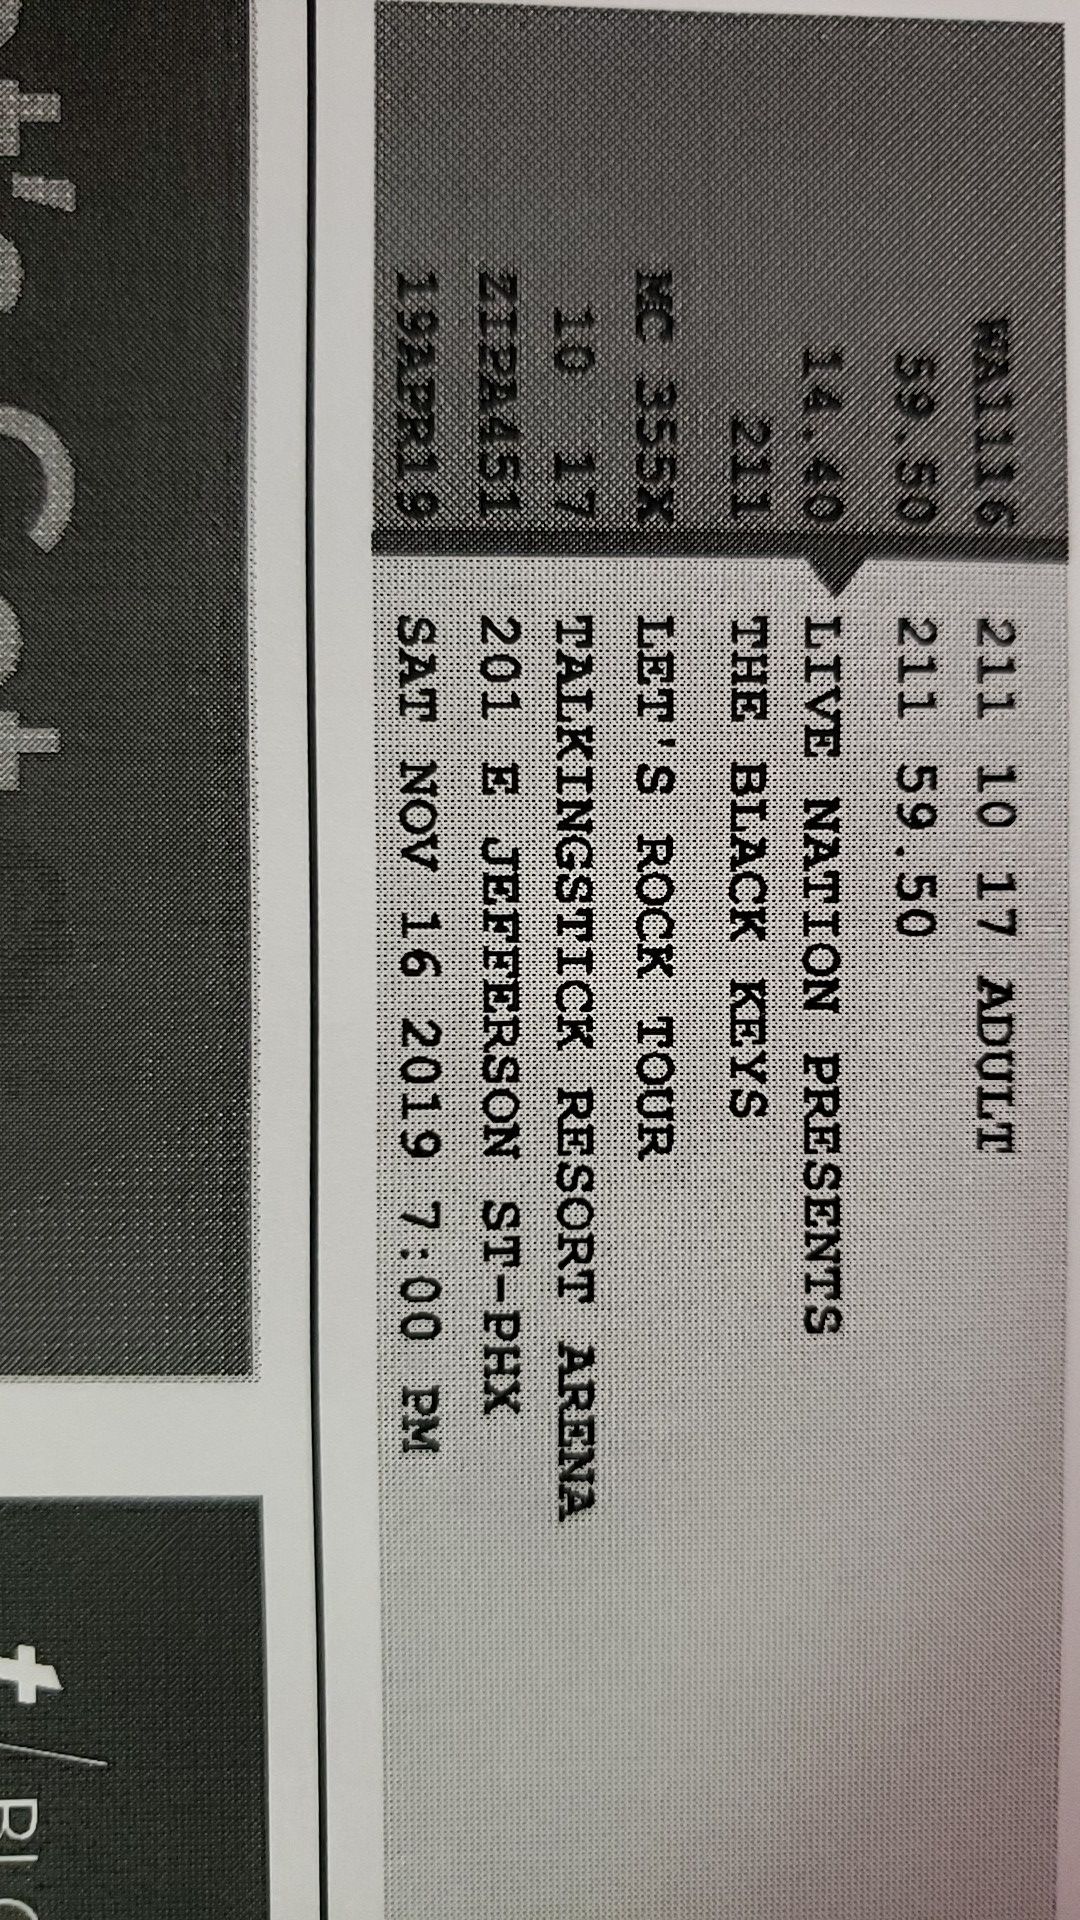 2 Tickets to the black keys let's rock tour